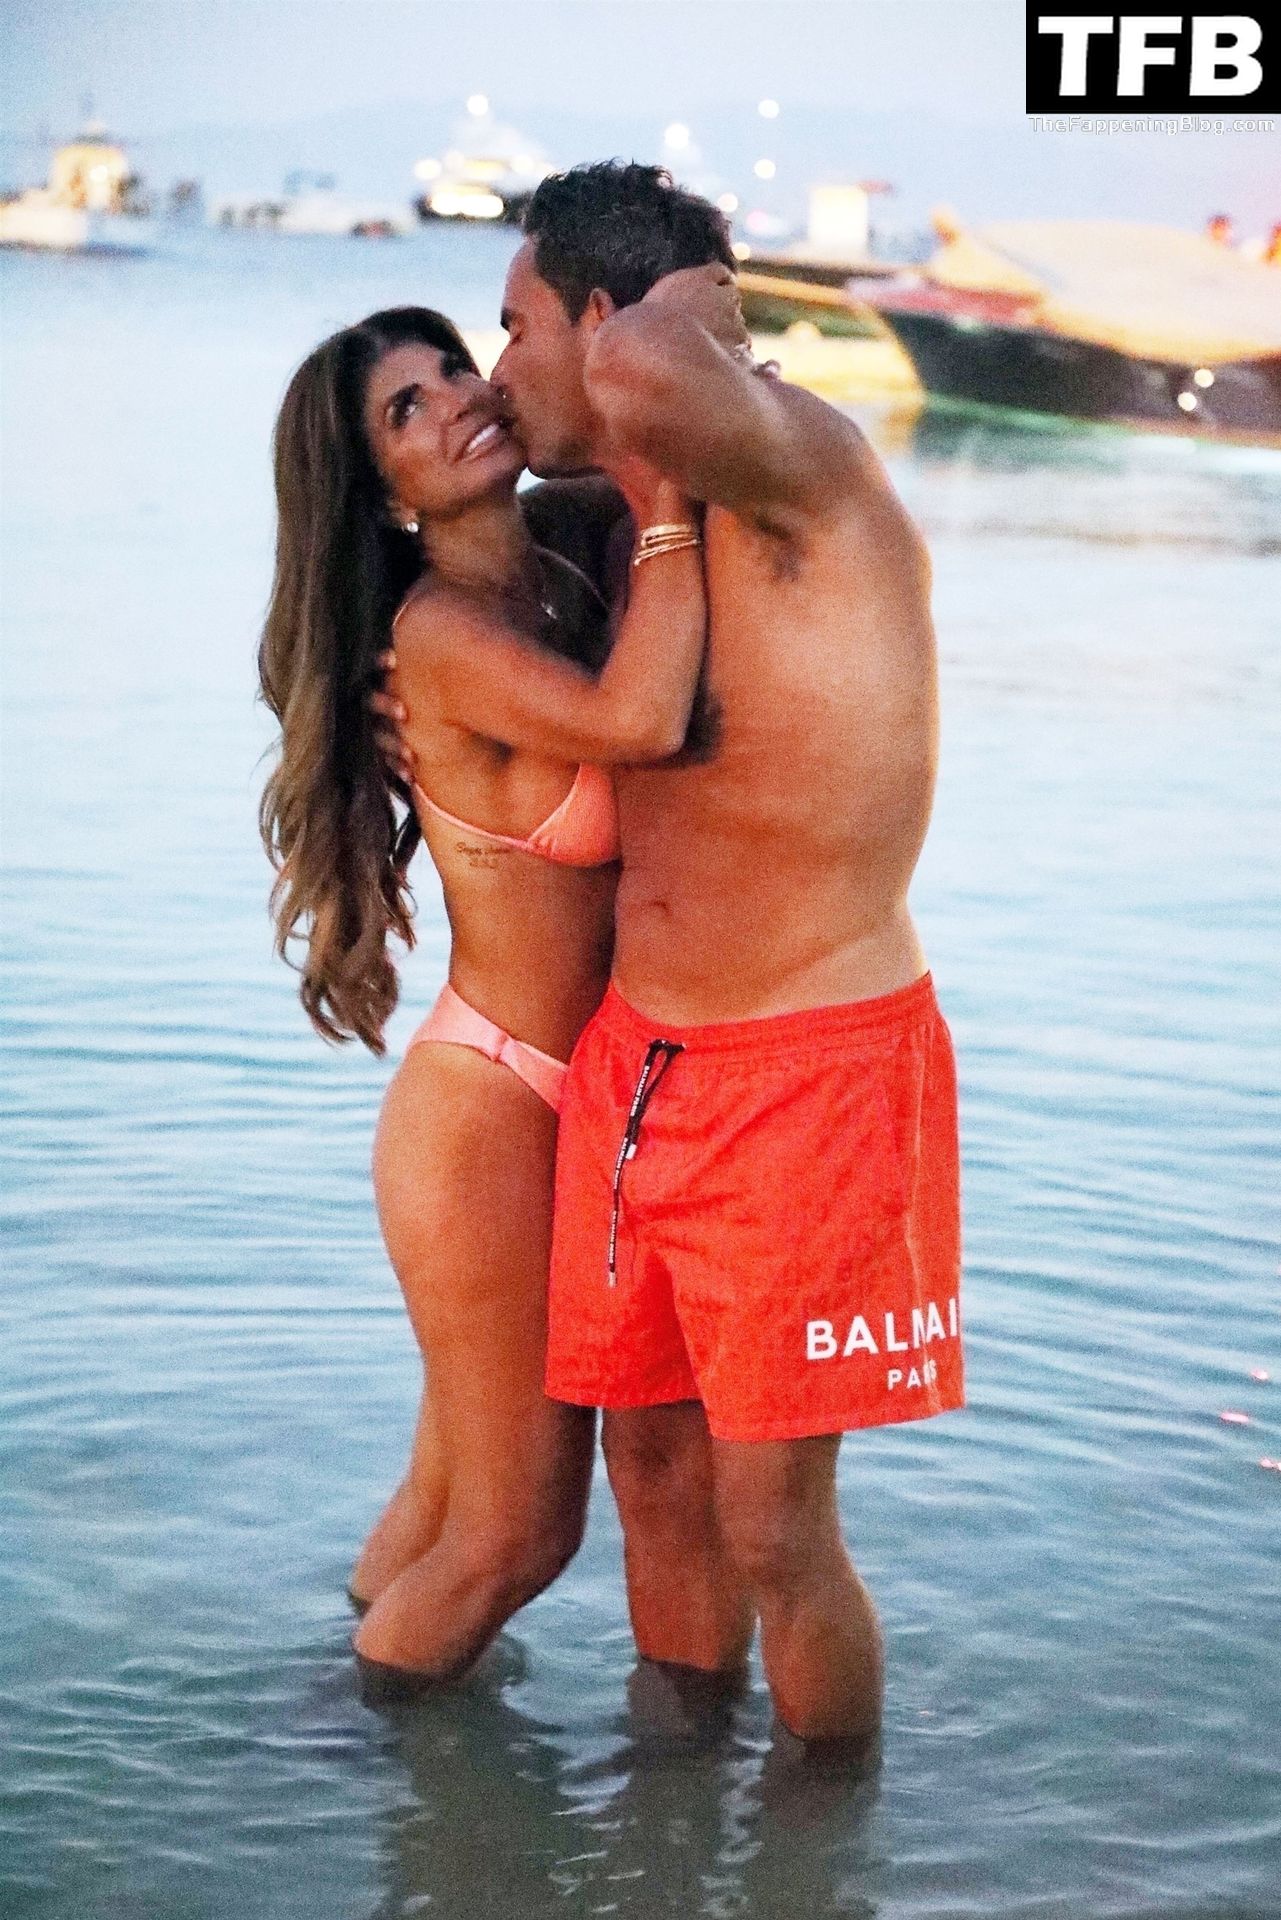 Teresa Giudice And Luis Ruelas Cant Keep Their Hands To Themselves During Their Honeymoon In 